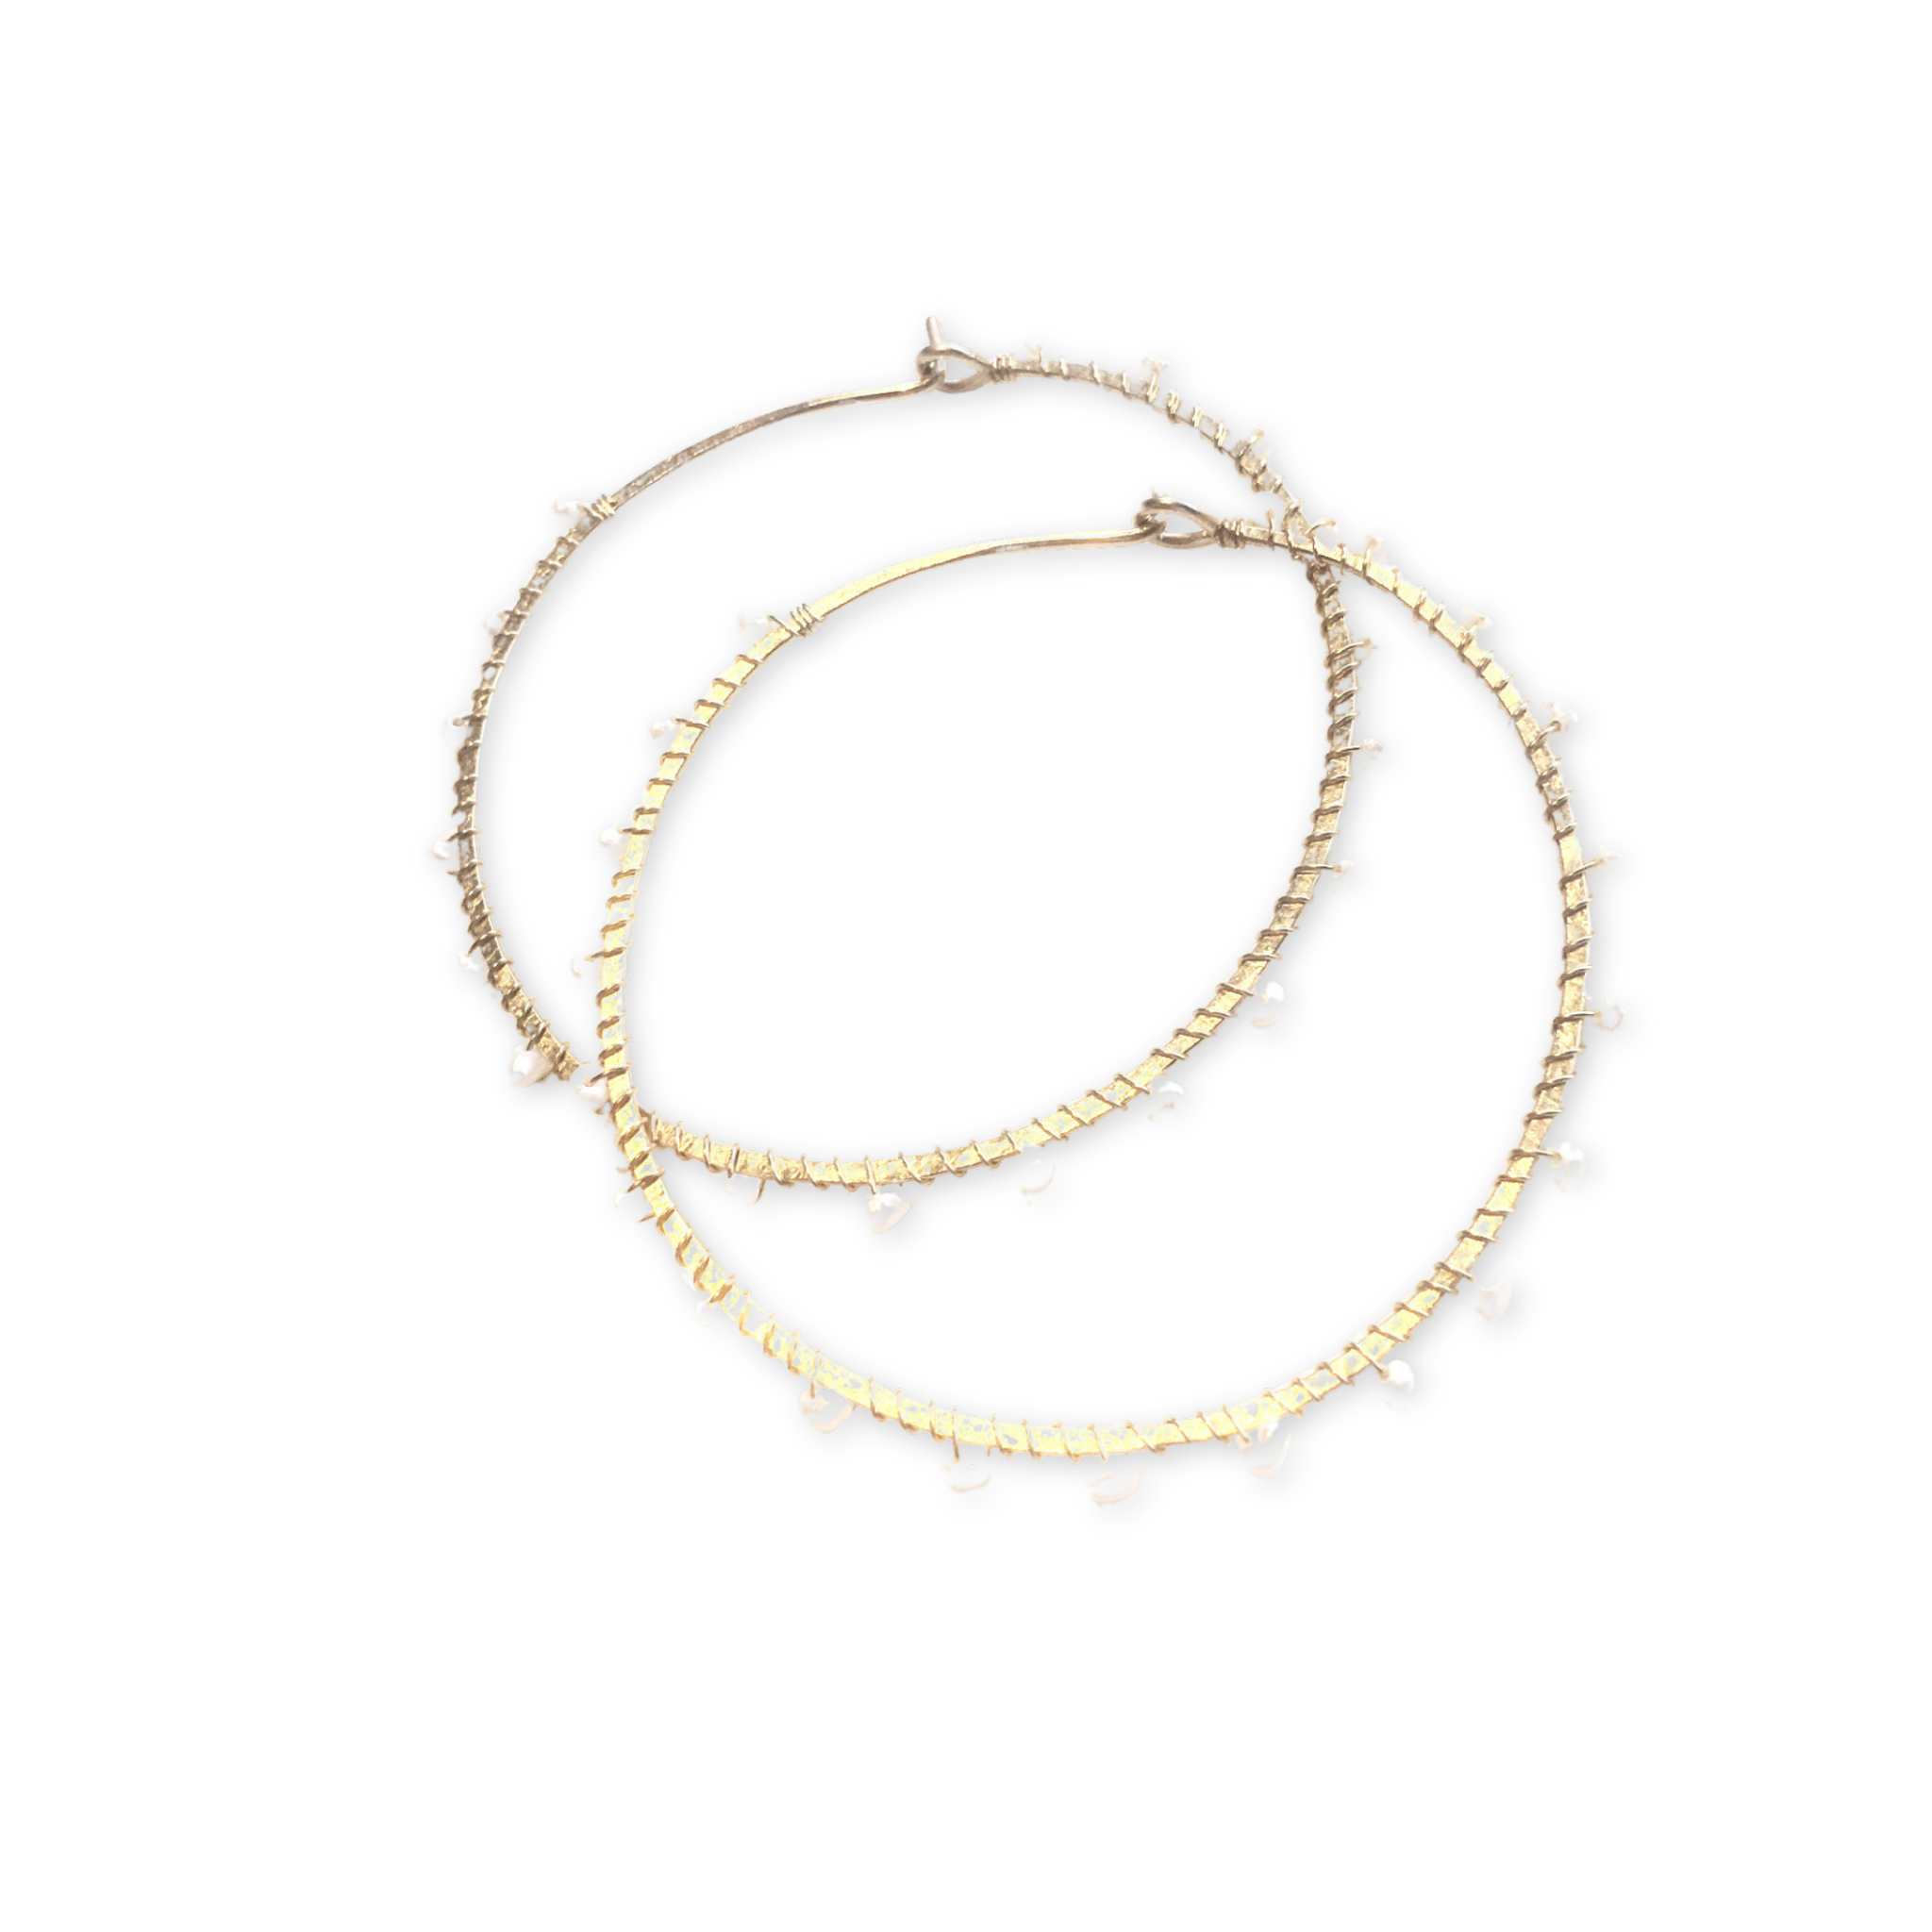 wire wrapped hoop earrings with small pearls